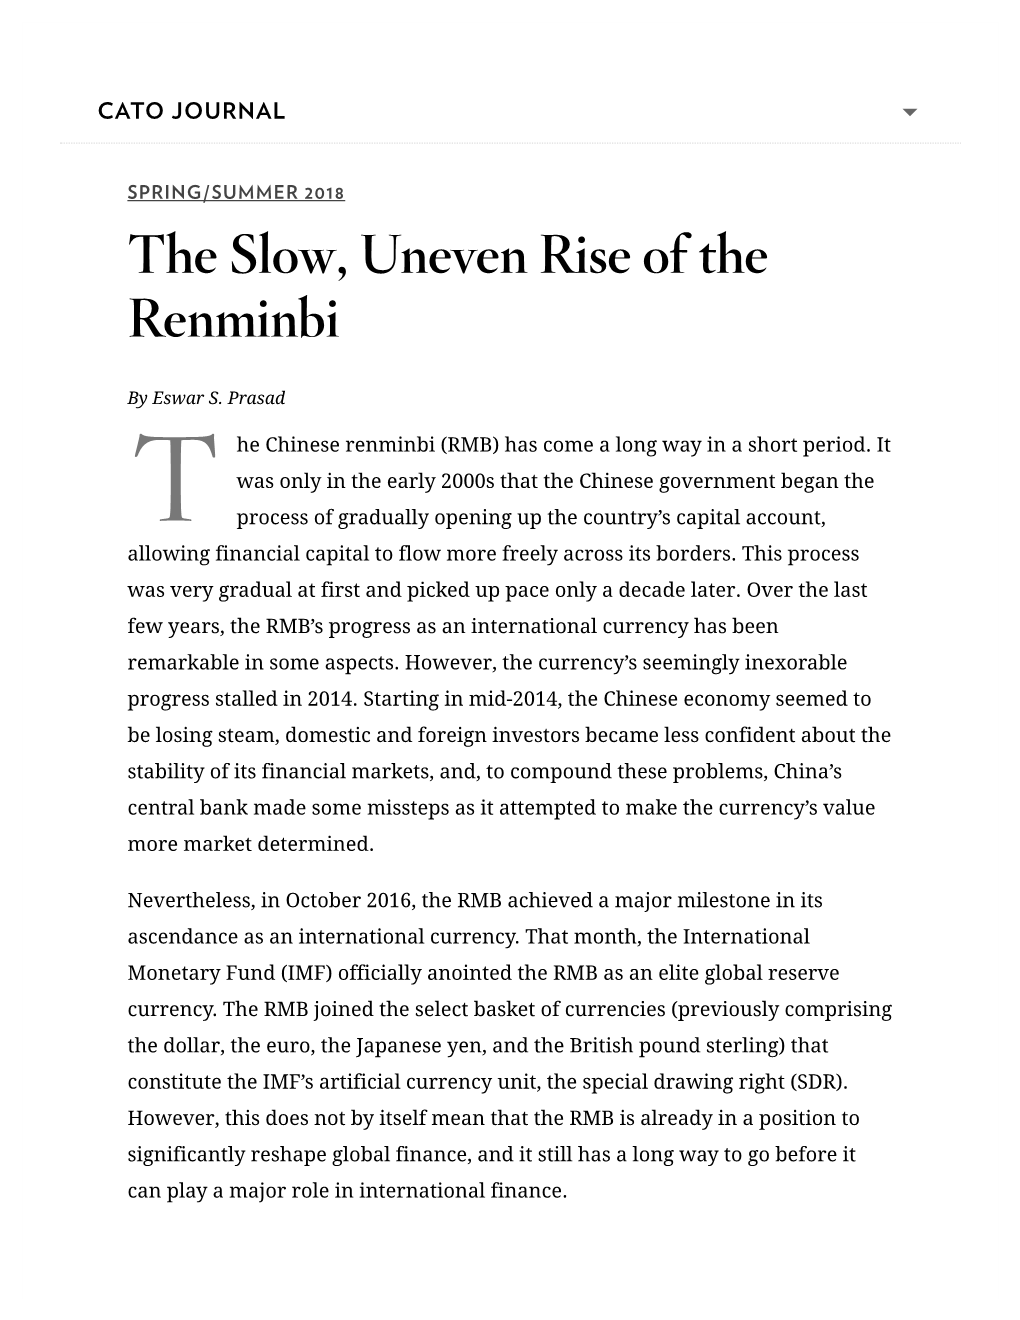 The Slow, Uneven Rise of the Renminbi